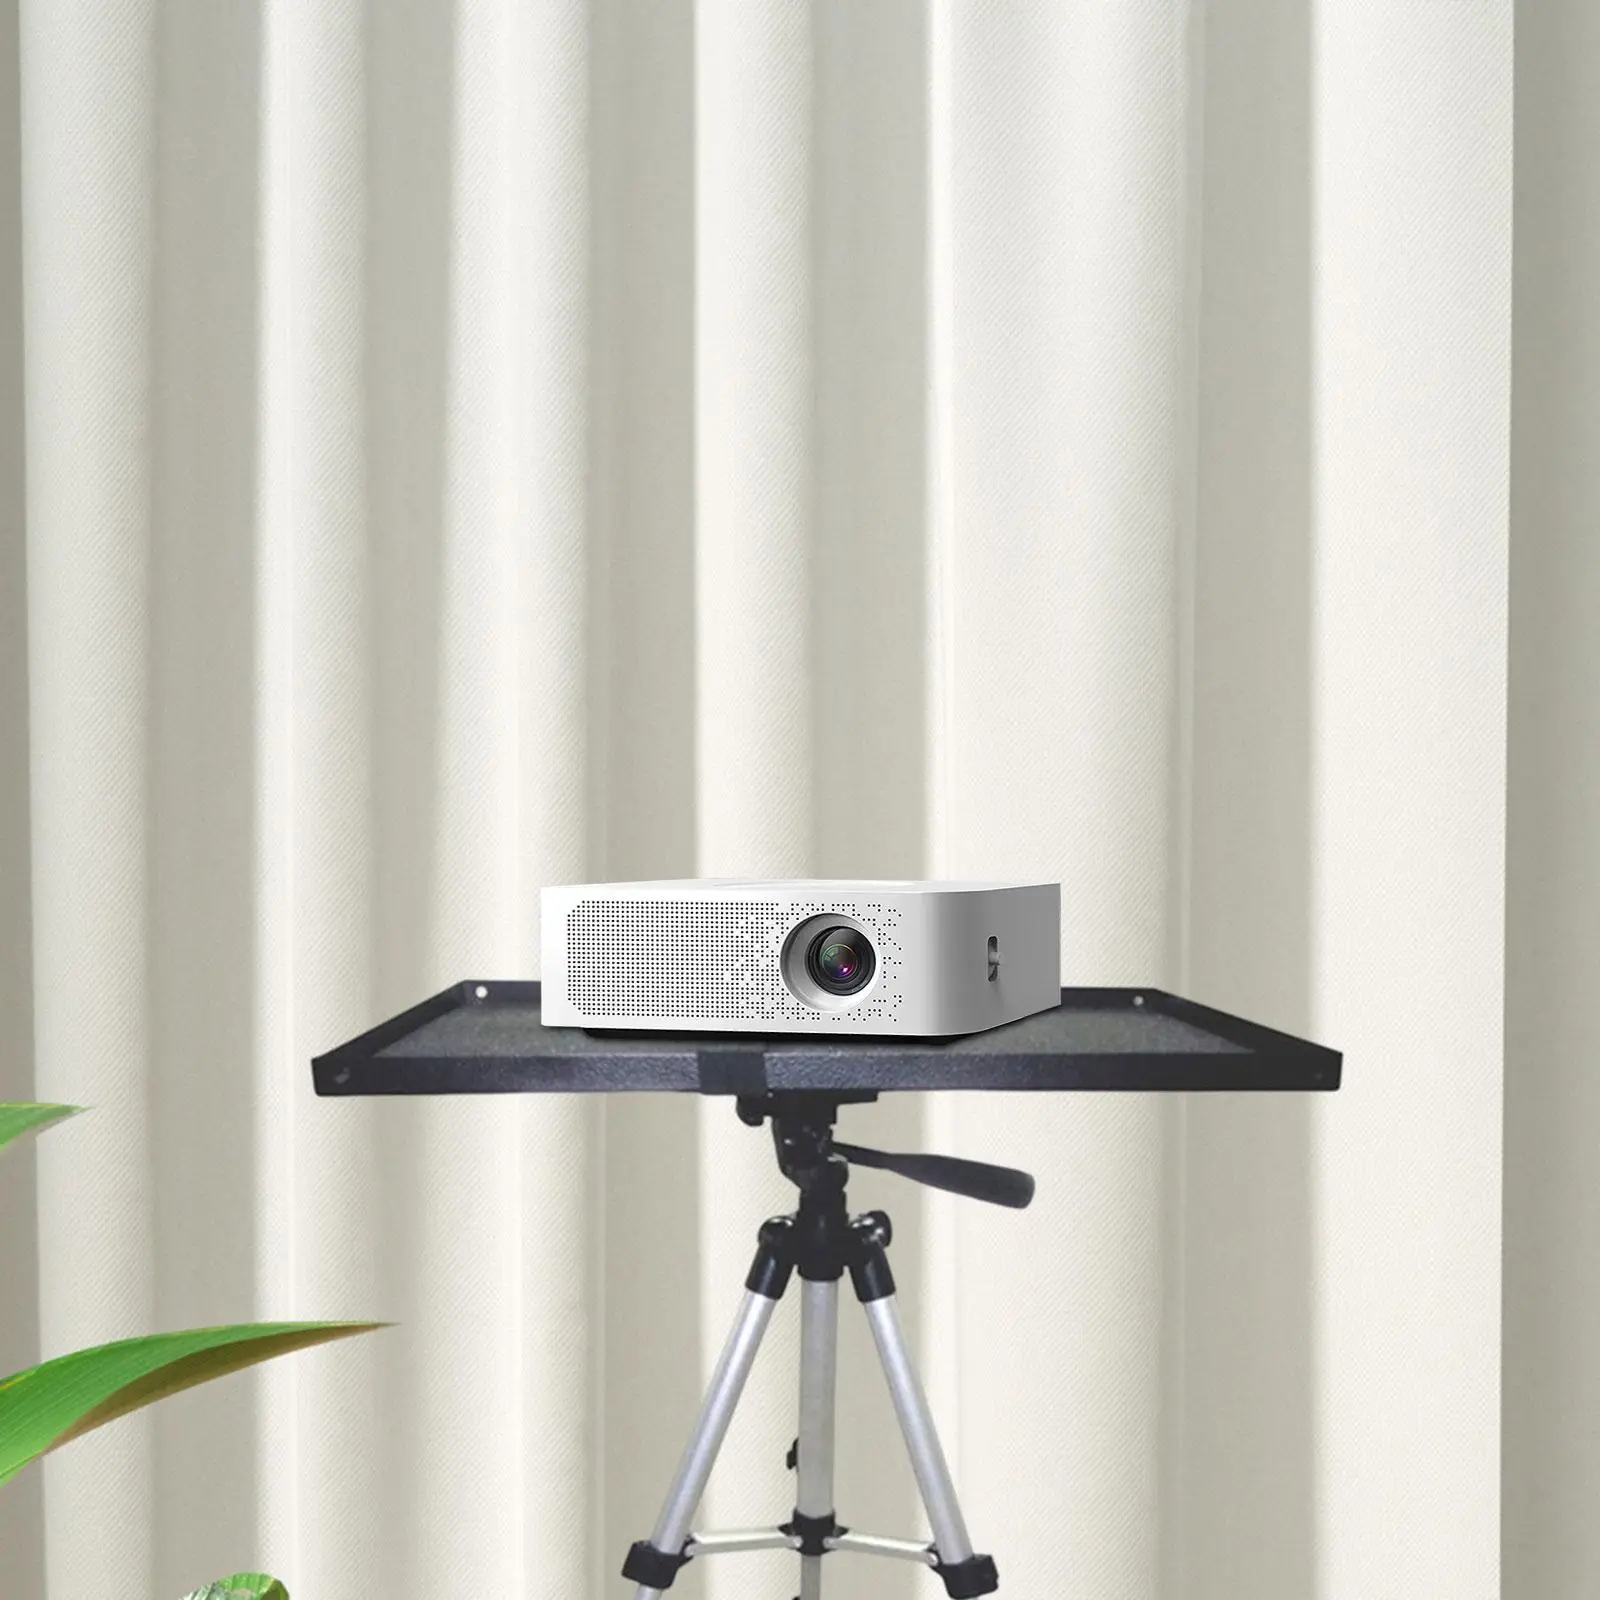 Professional Floor Tripod Stand Mount Holder Tray Detachable for Notebook